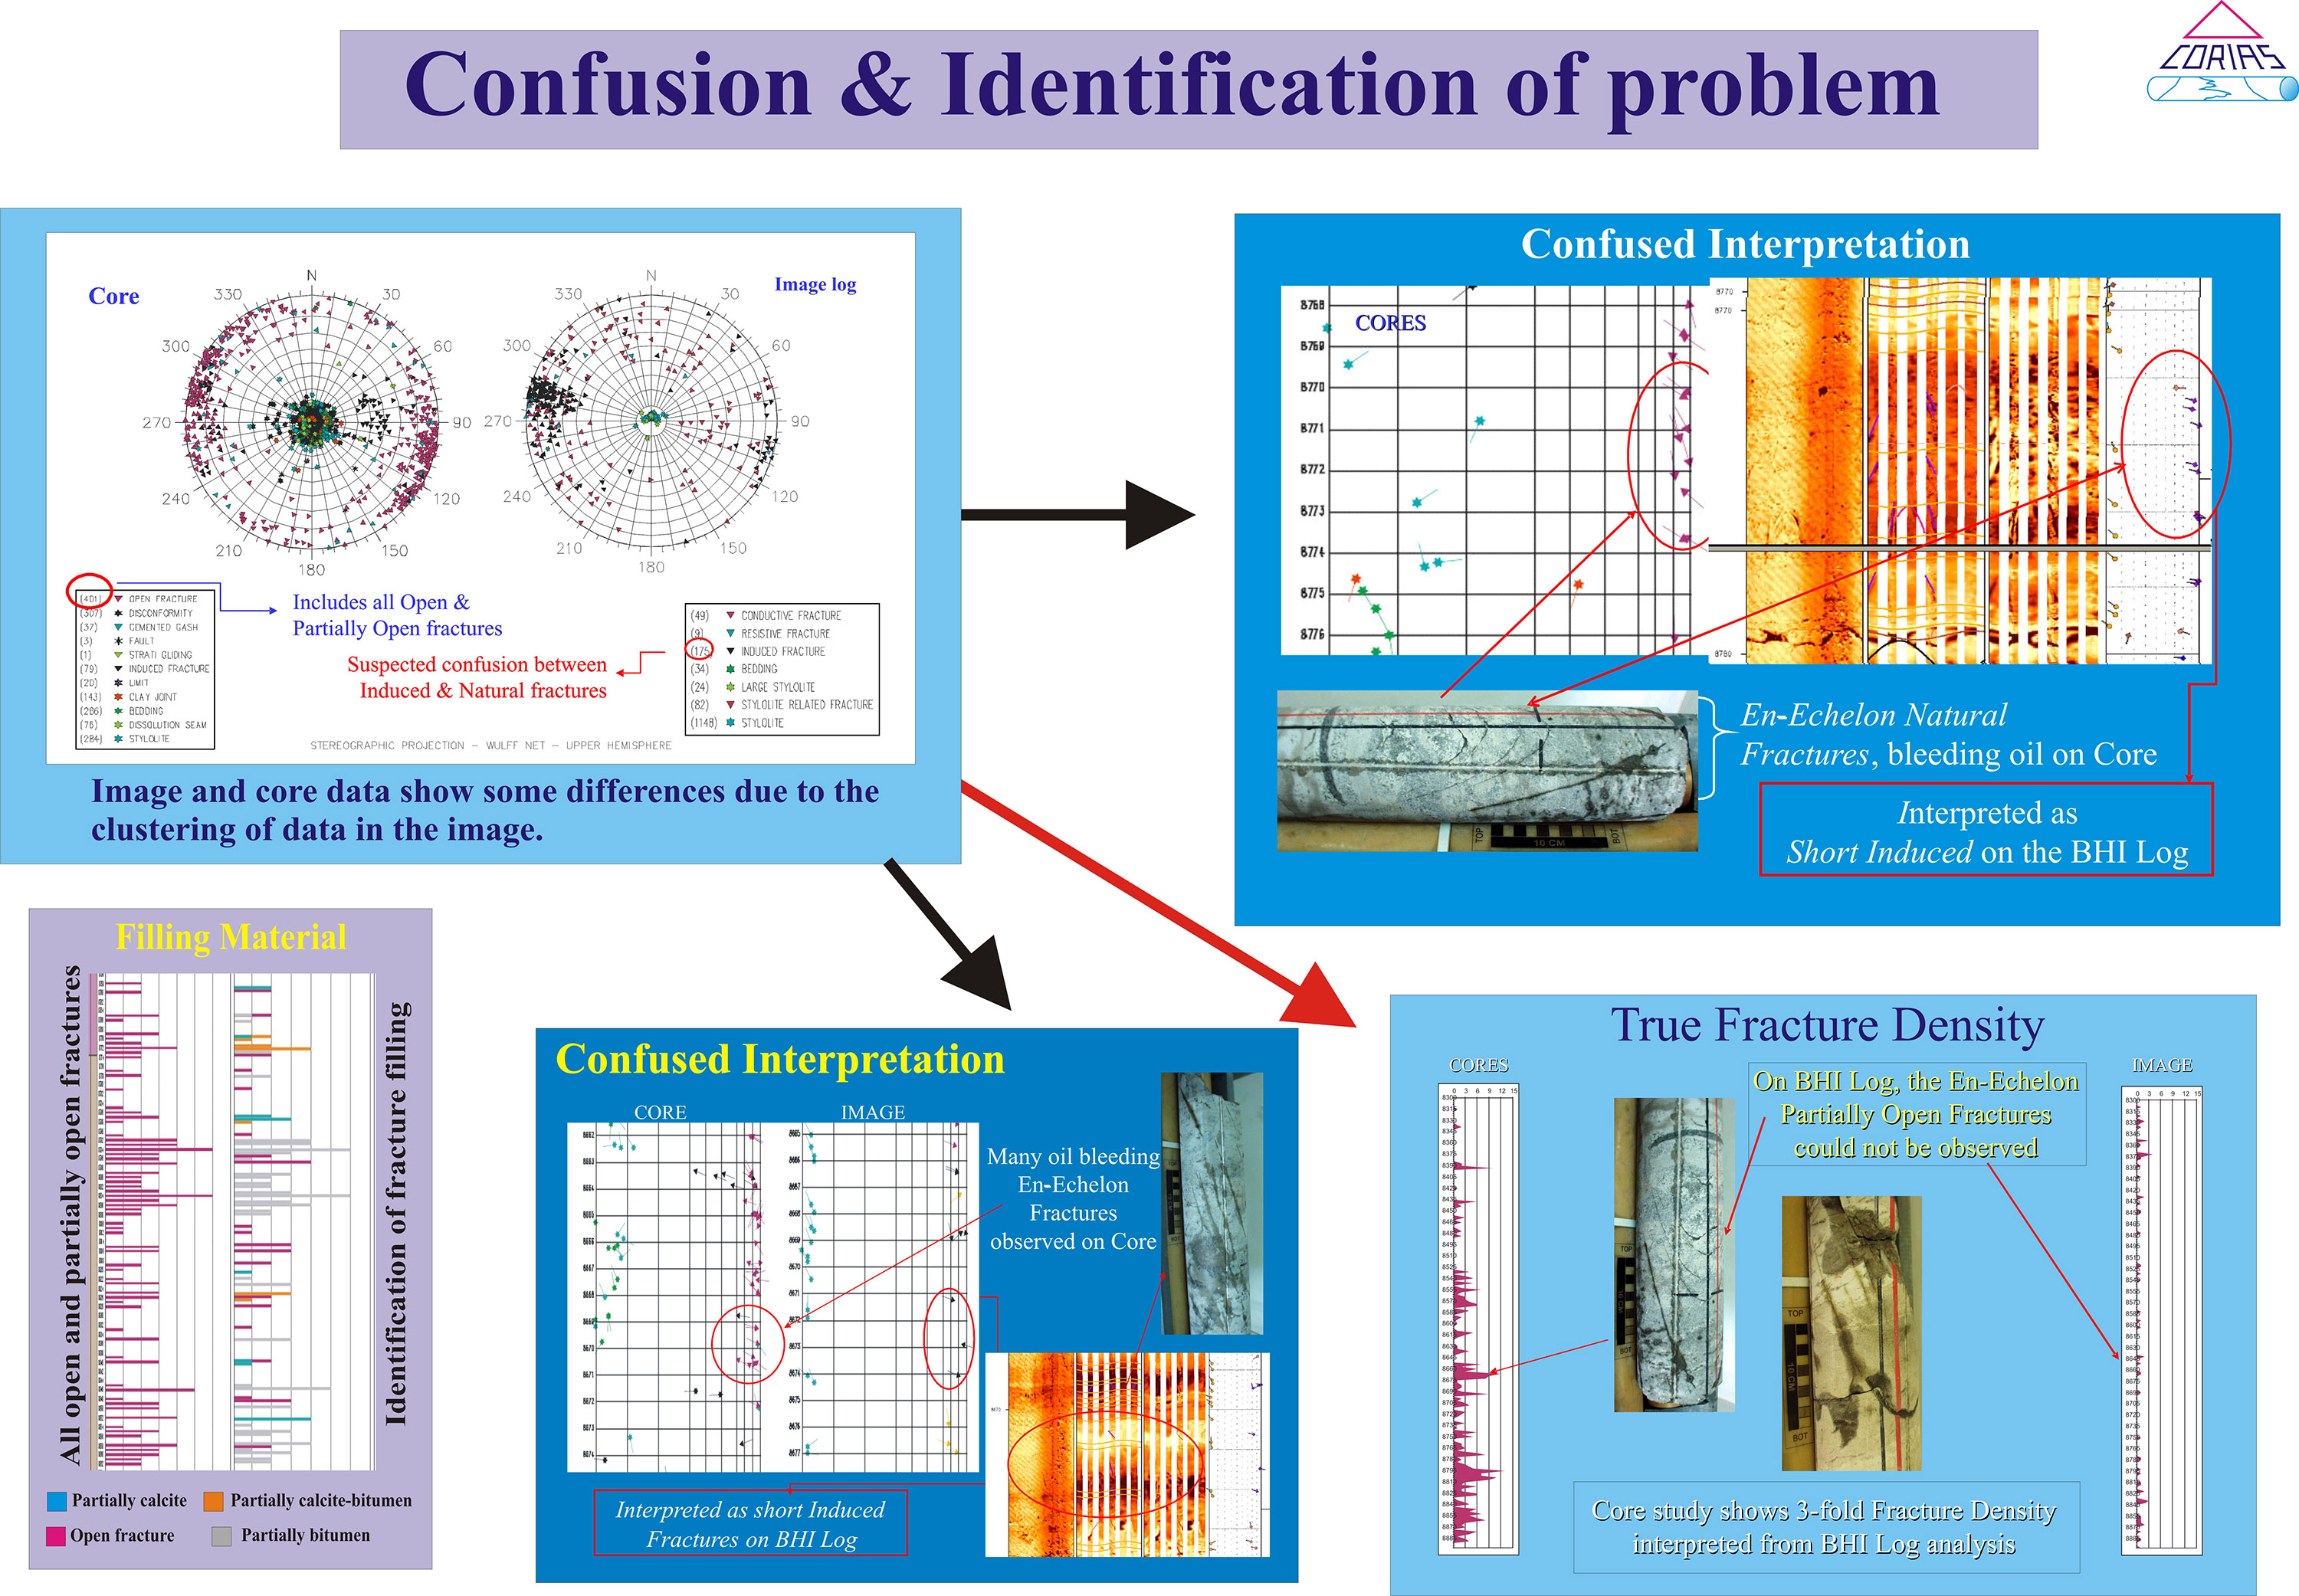 Corias Confusion and identification of problem